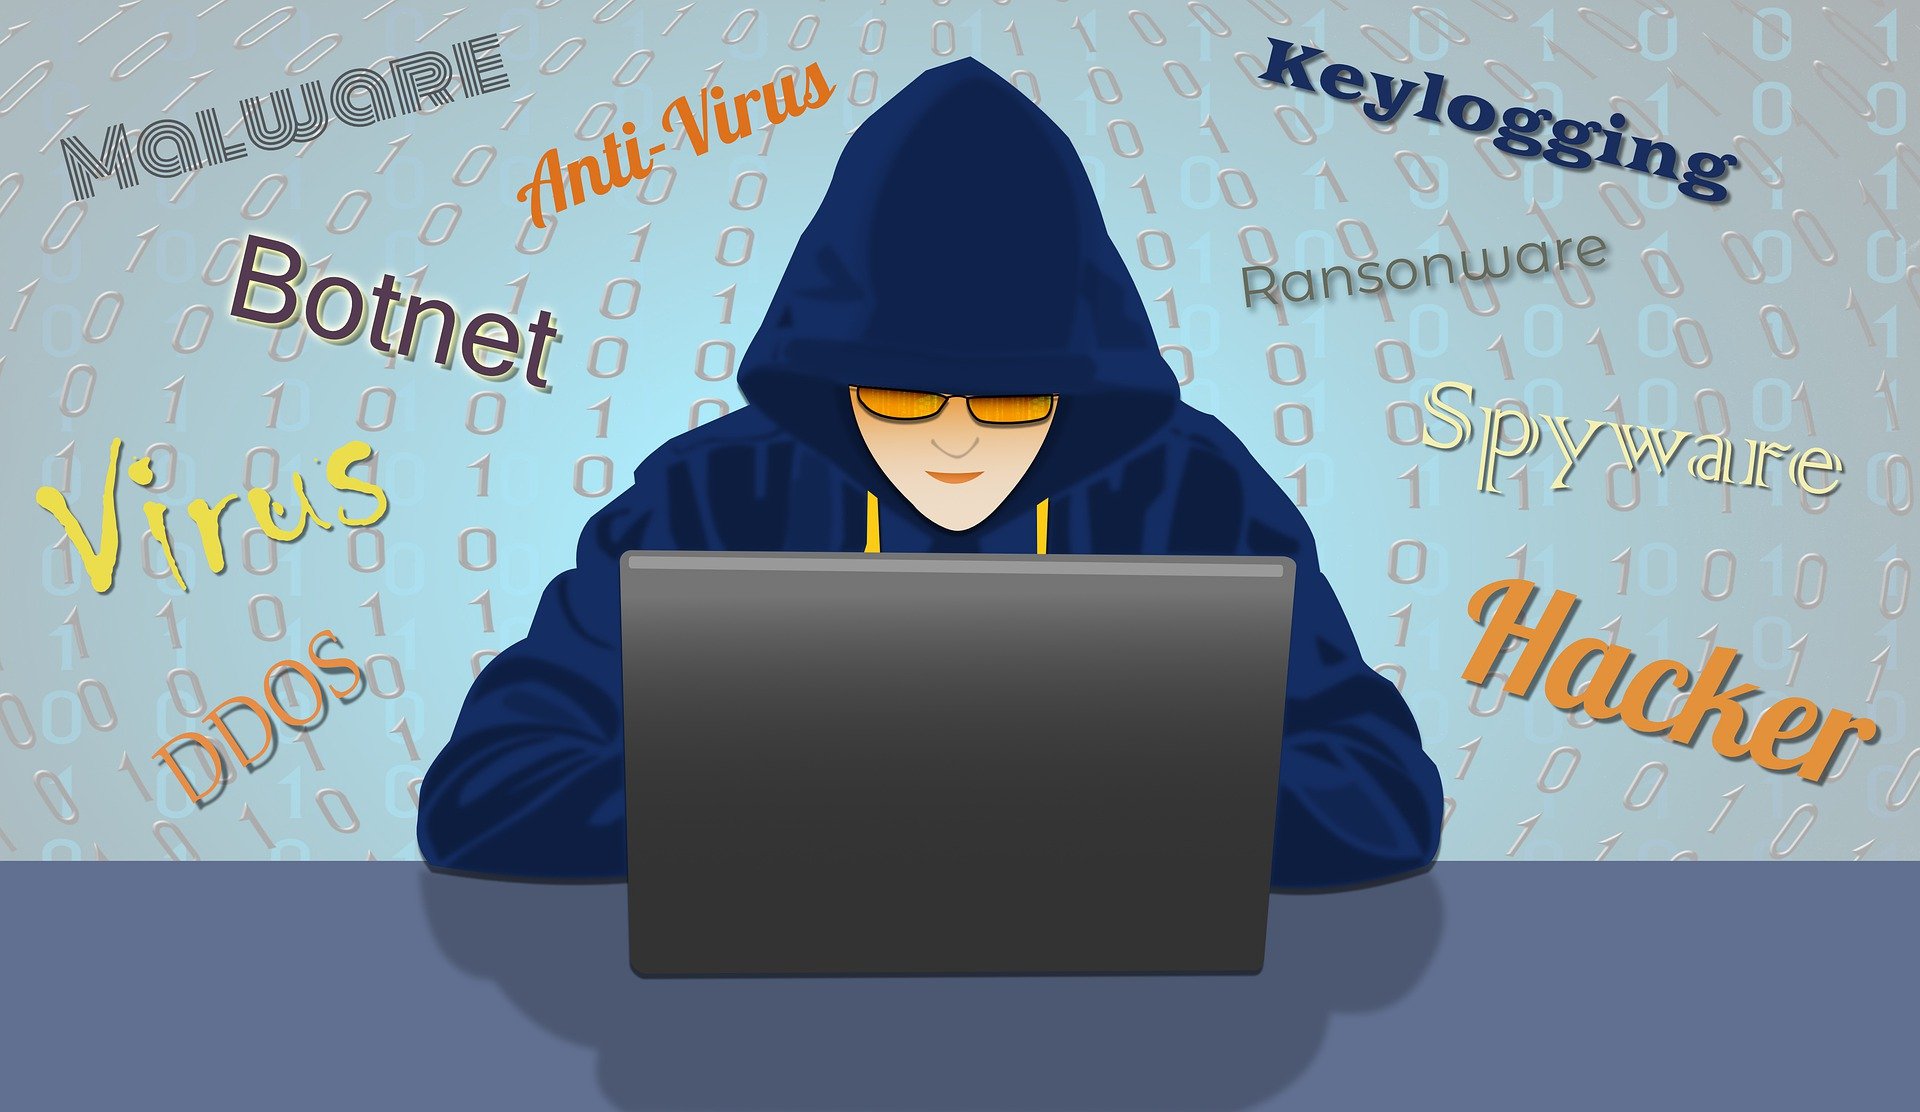 The Top 10 Most Common Internet Threats